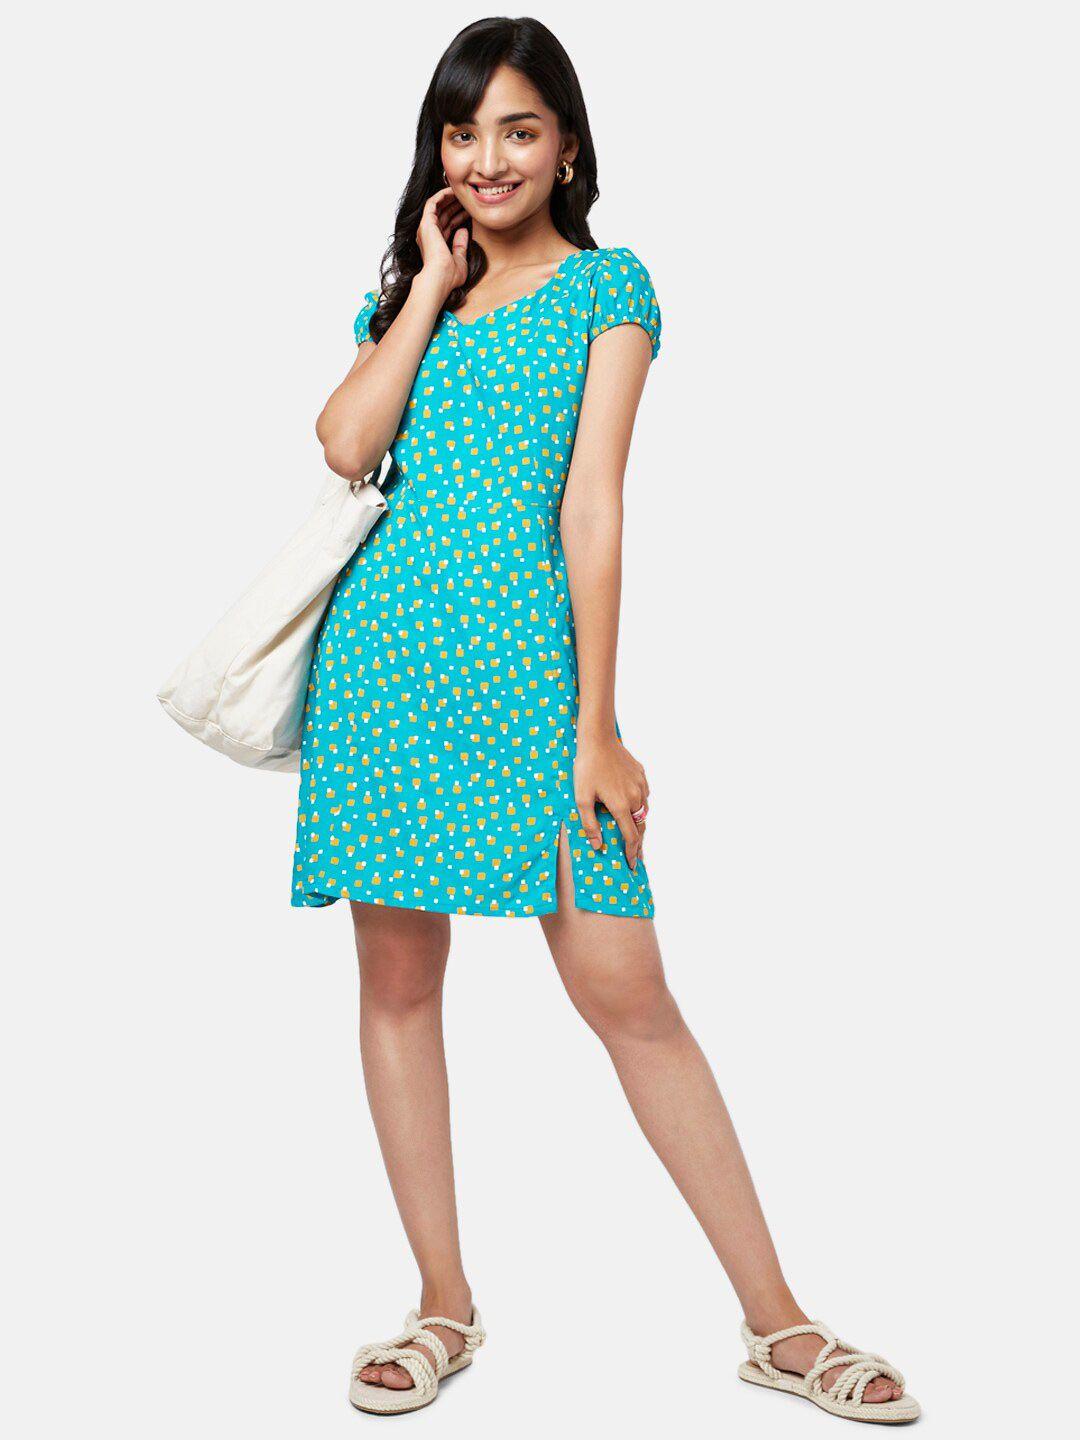 yu by pantaloons turquoise blue a-line dress